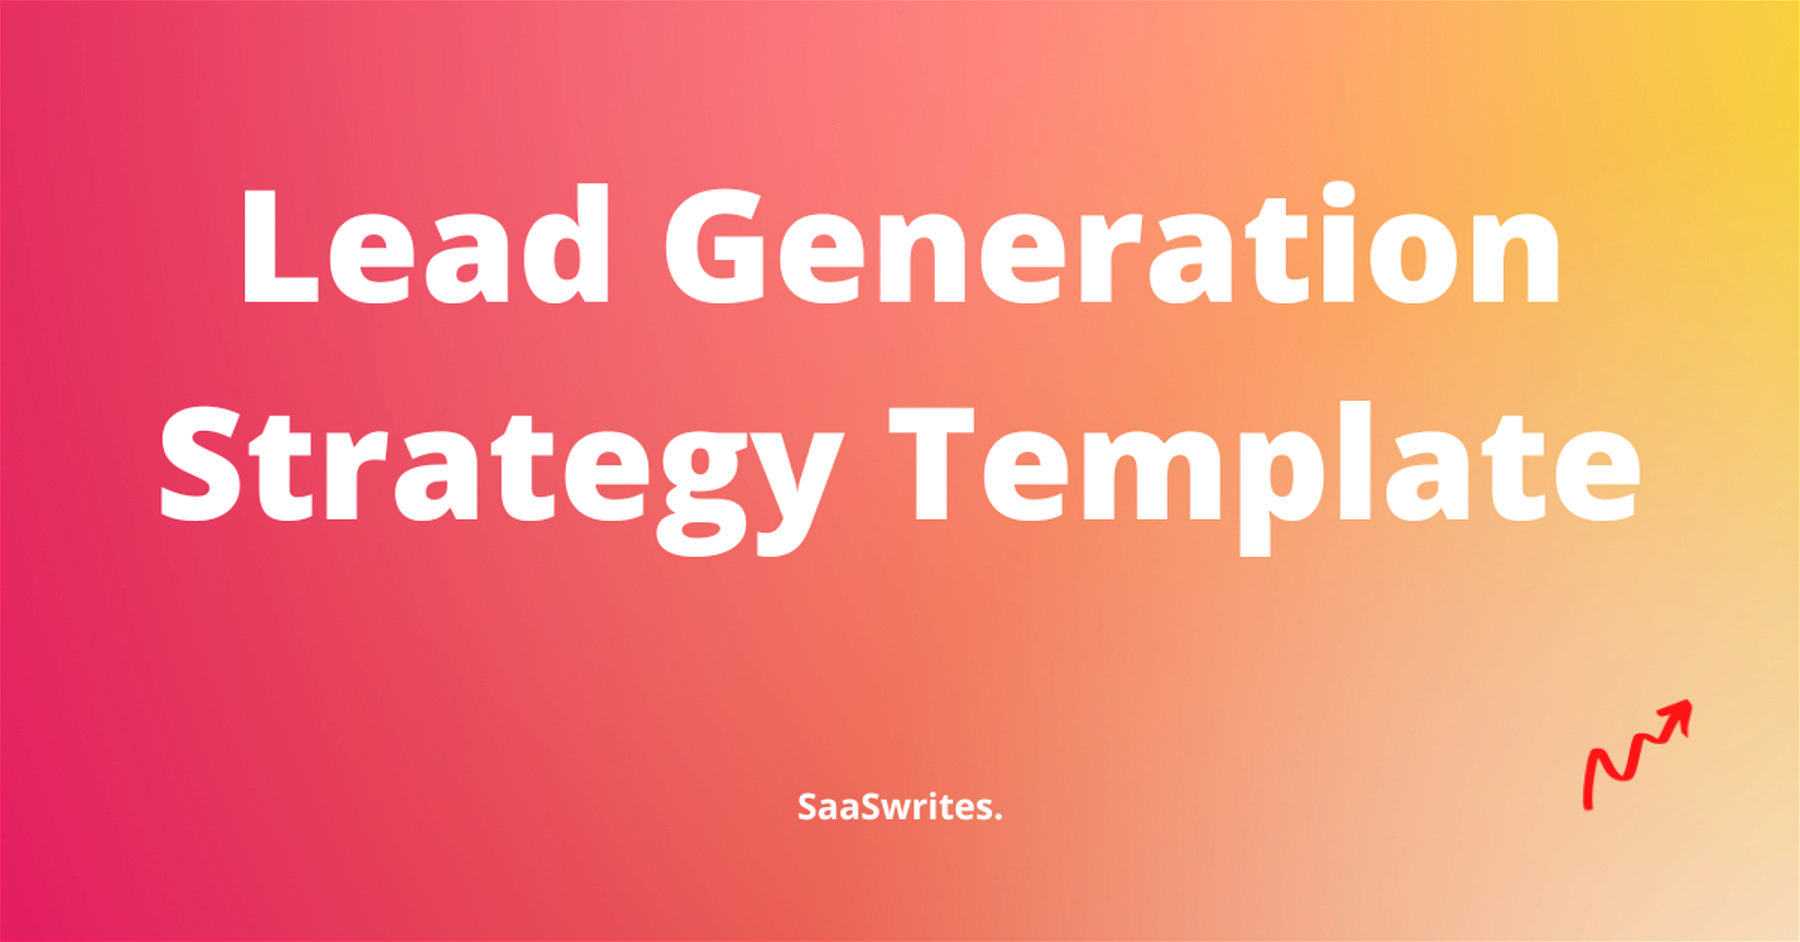 Lead Generation Strategy Template